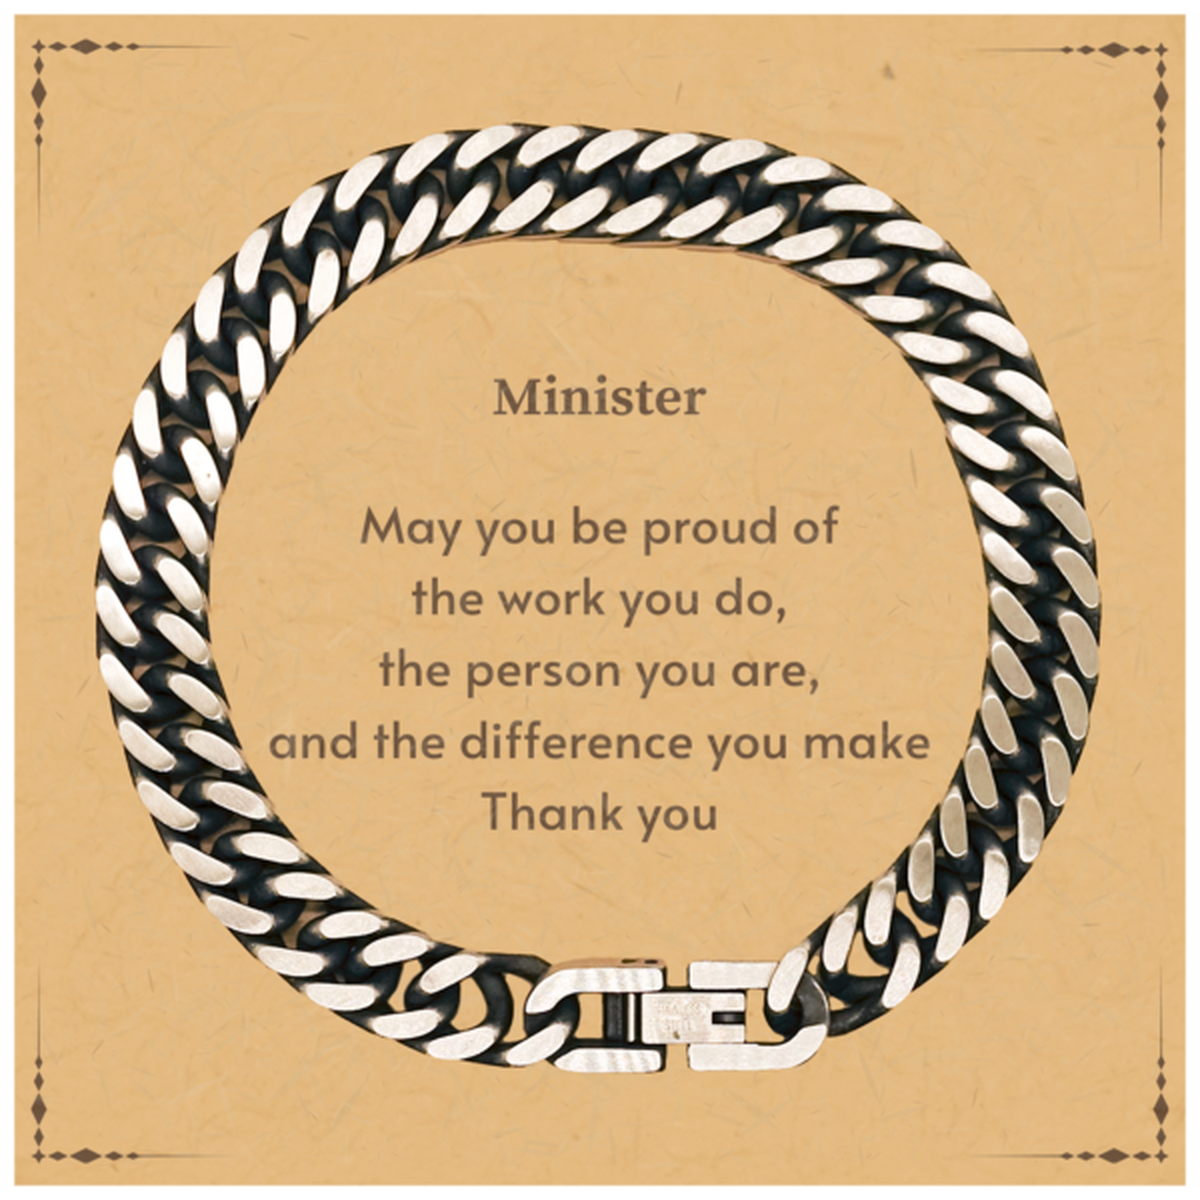 Heartwarming Cuban Link Chain Bracelet Retirement Coworkers Gifts for Minister, Minister May You be proud of the work you do, the person you are Gifts for Boss Men Women Friends